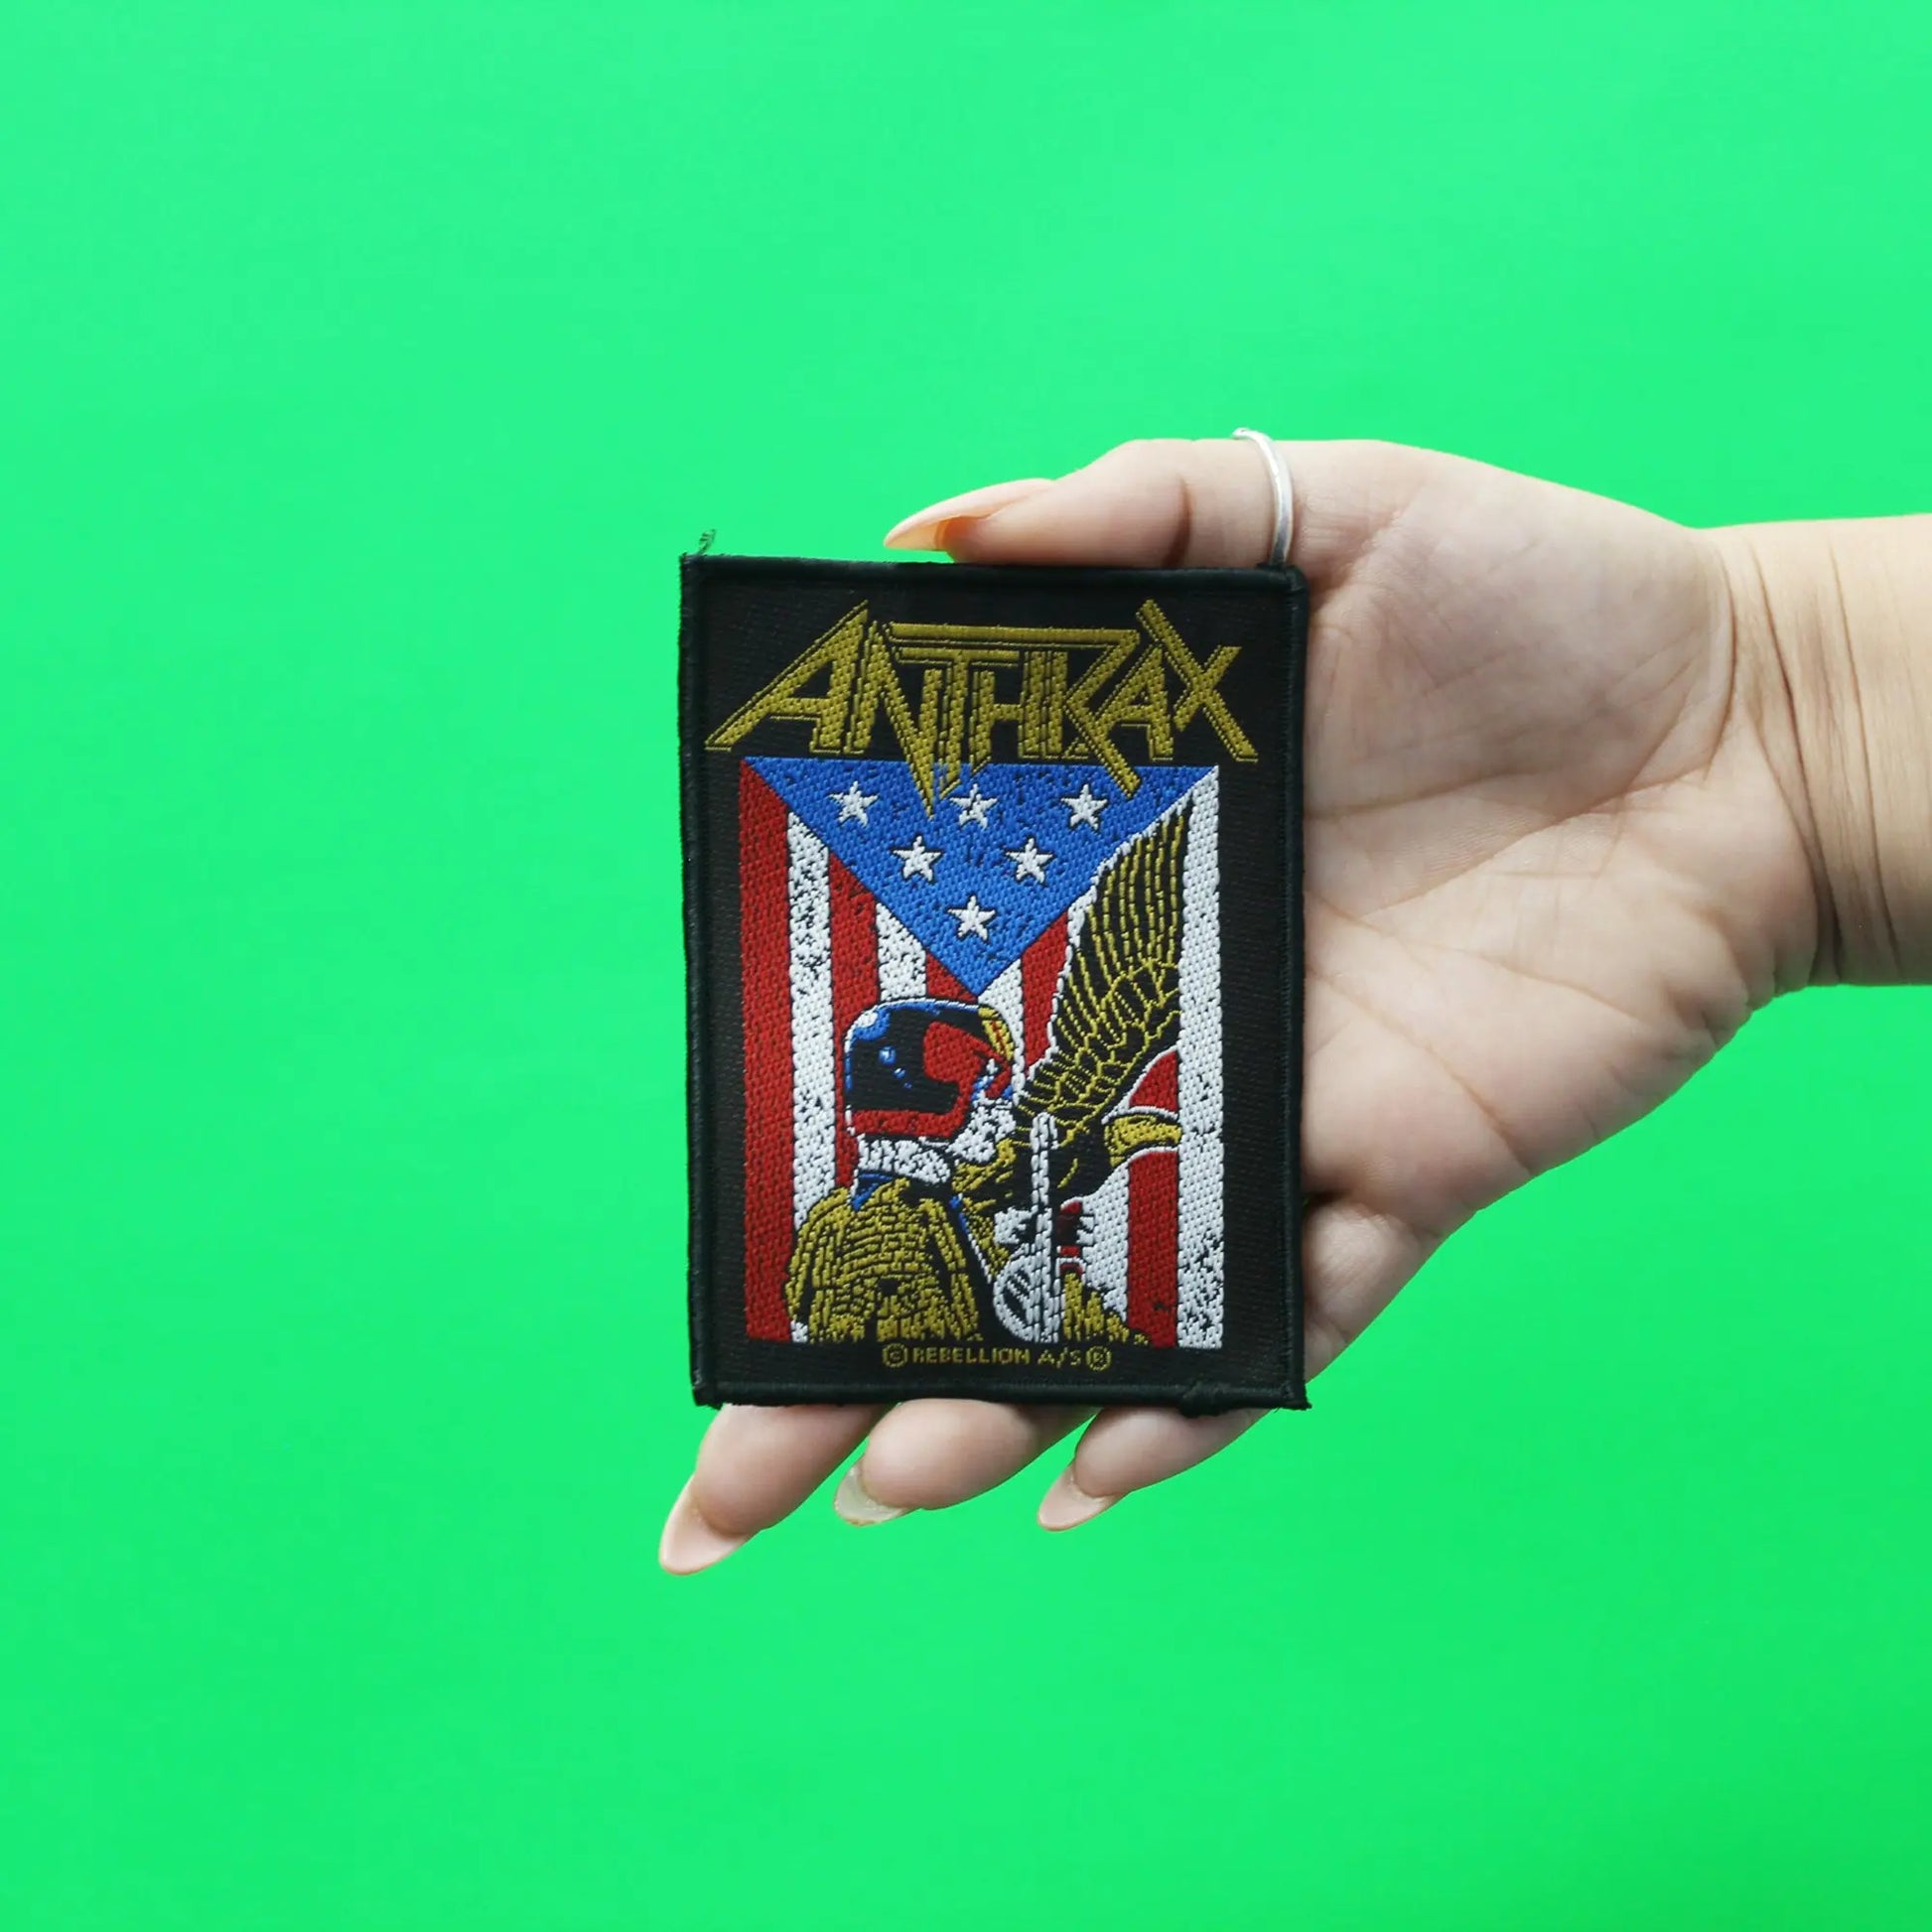 Anthrax Judge Dredd Woven Sew On Patch 